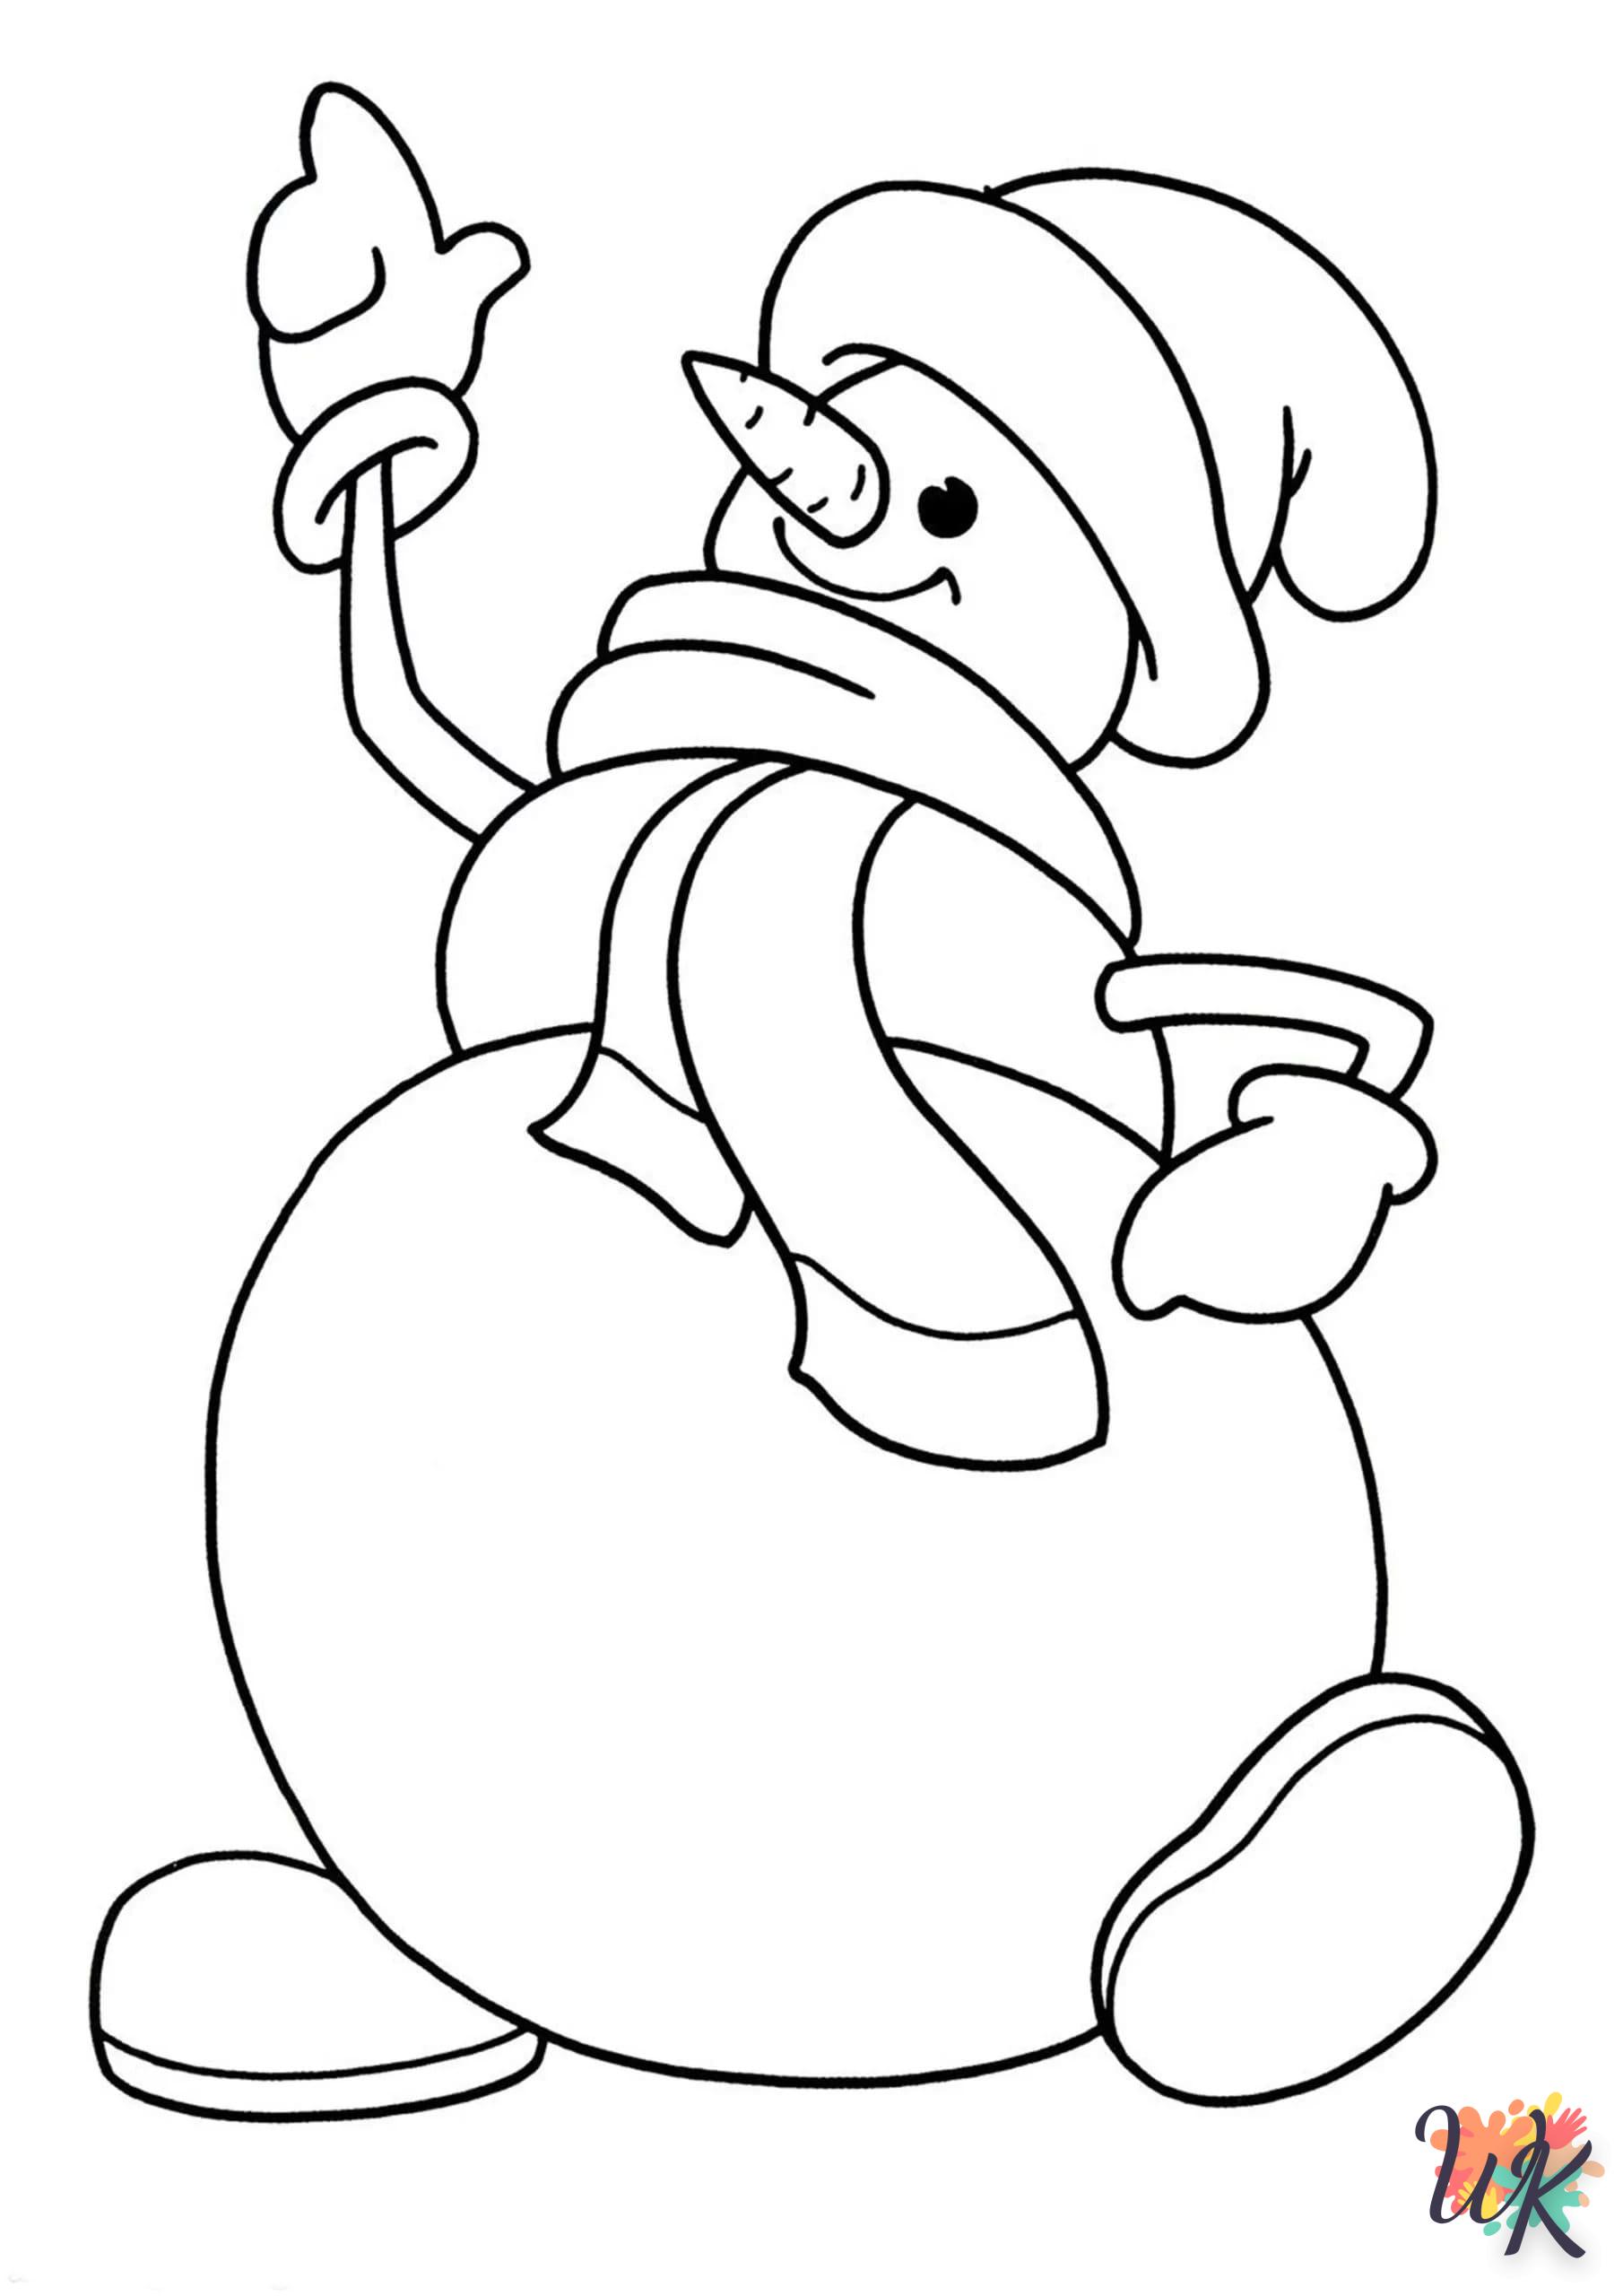 Snowman coloring online for free adults